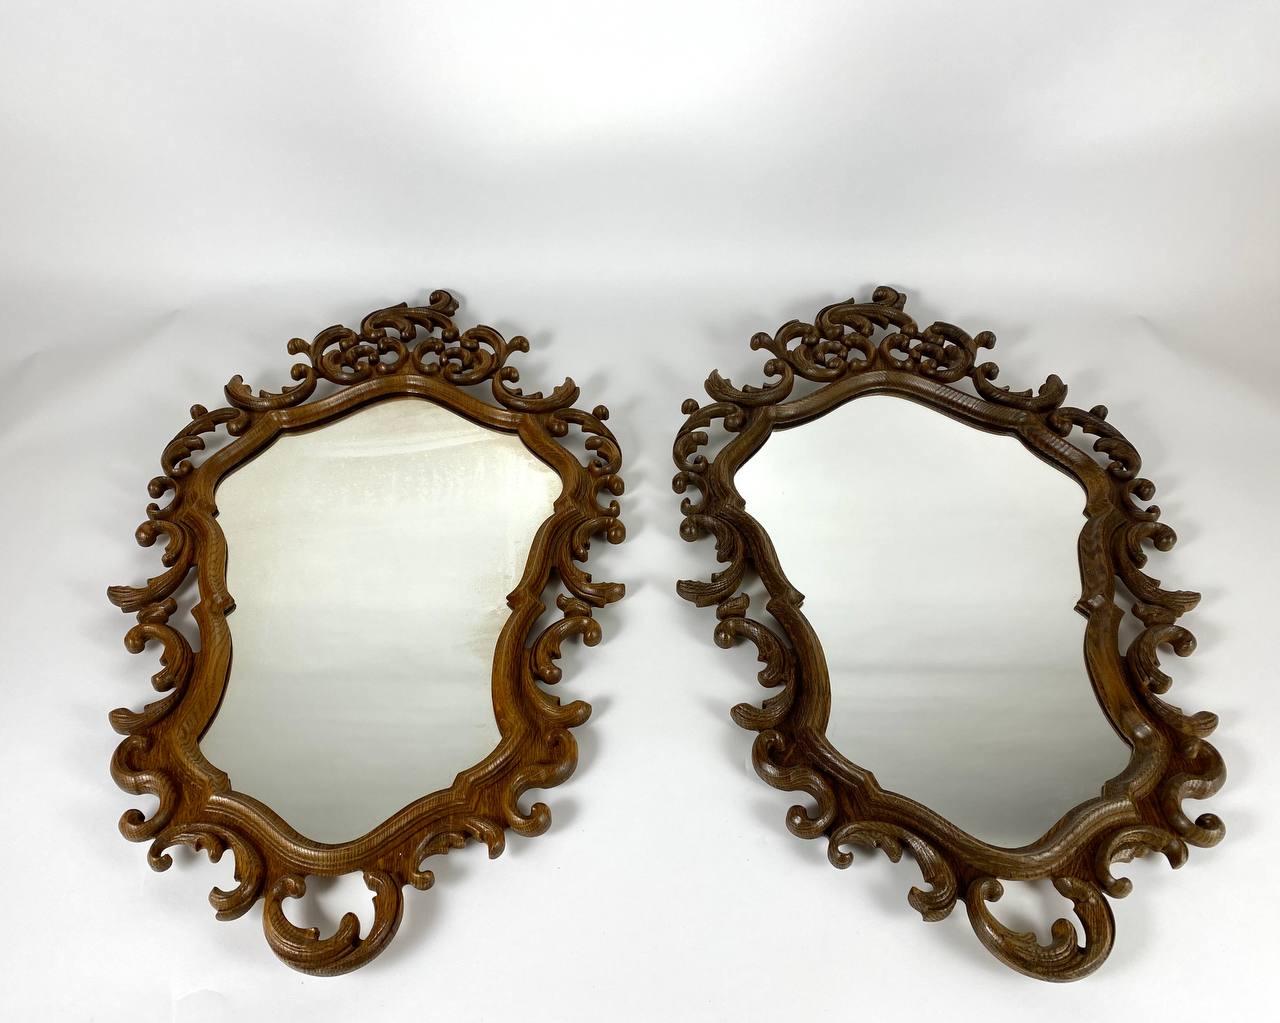 Empire style vintage wall mirror in beautiful wooden frame.

This vintage mirror has been expertly crafted.

Echoing the refined palatial style of the last century, this exquisitely hand-carved wood-framed wall mirror is infused with a sumptuous